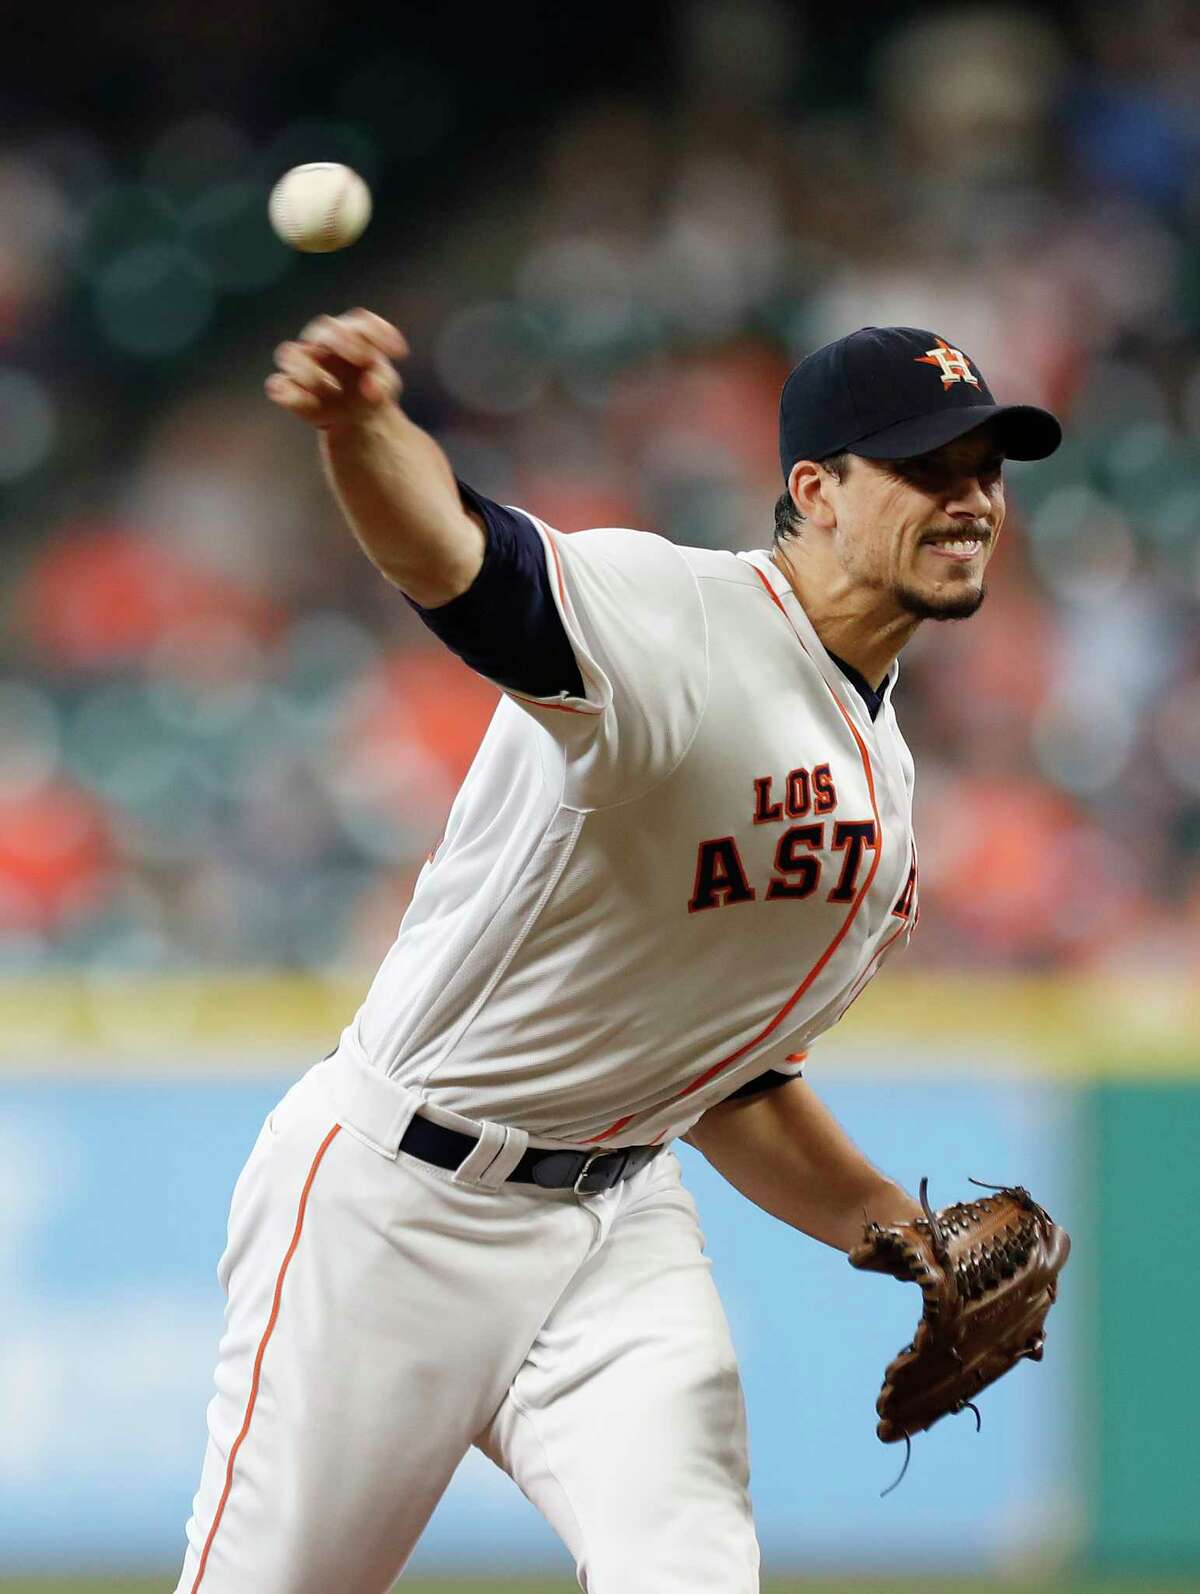 Houston Astros starting pitcher Charlie Morton (50) pitches during the first inning of an MLB baseball game at Minute Maid Park, Saturday, Sept. 23, 2017, in Houston.